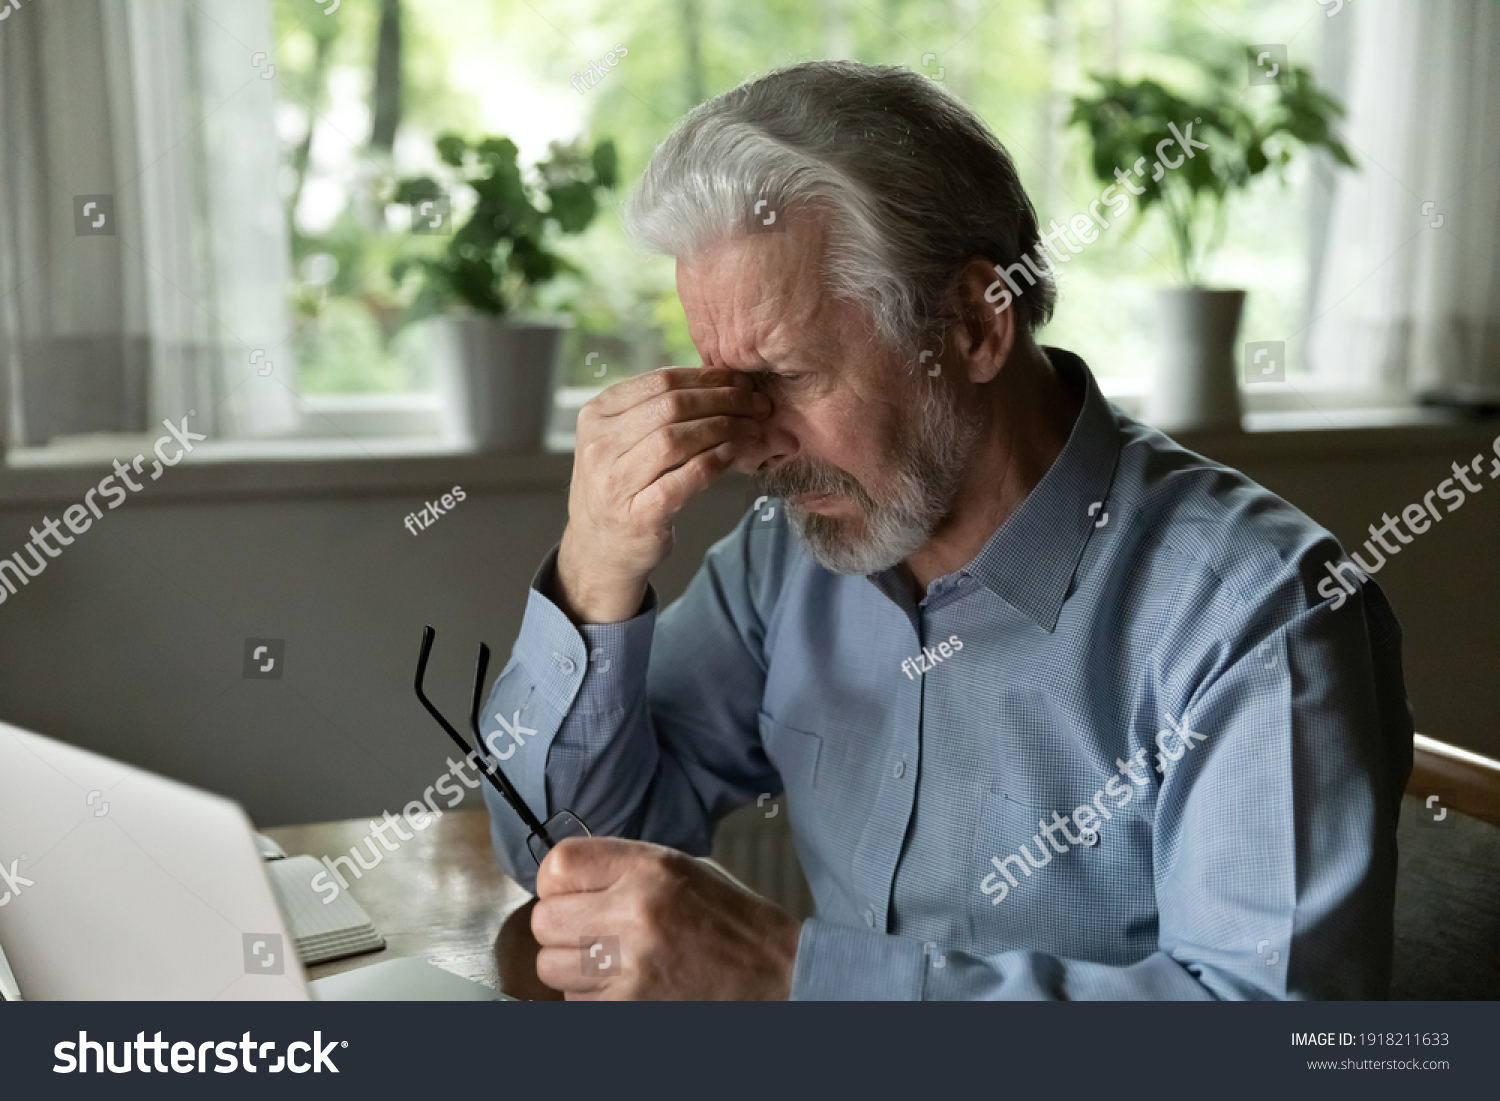 Close up stressed mature man massaging nose bridge, holding glasses, sitting at desk with laptop, elderly grey haired male suffering from eye strain, dry eyes syndrome after long laptop use #1918211633